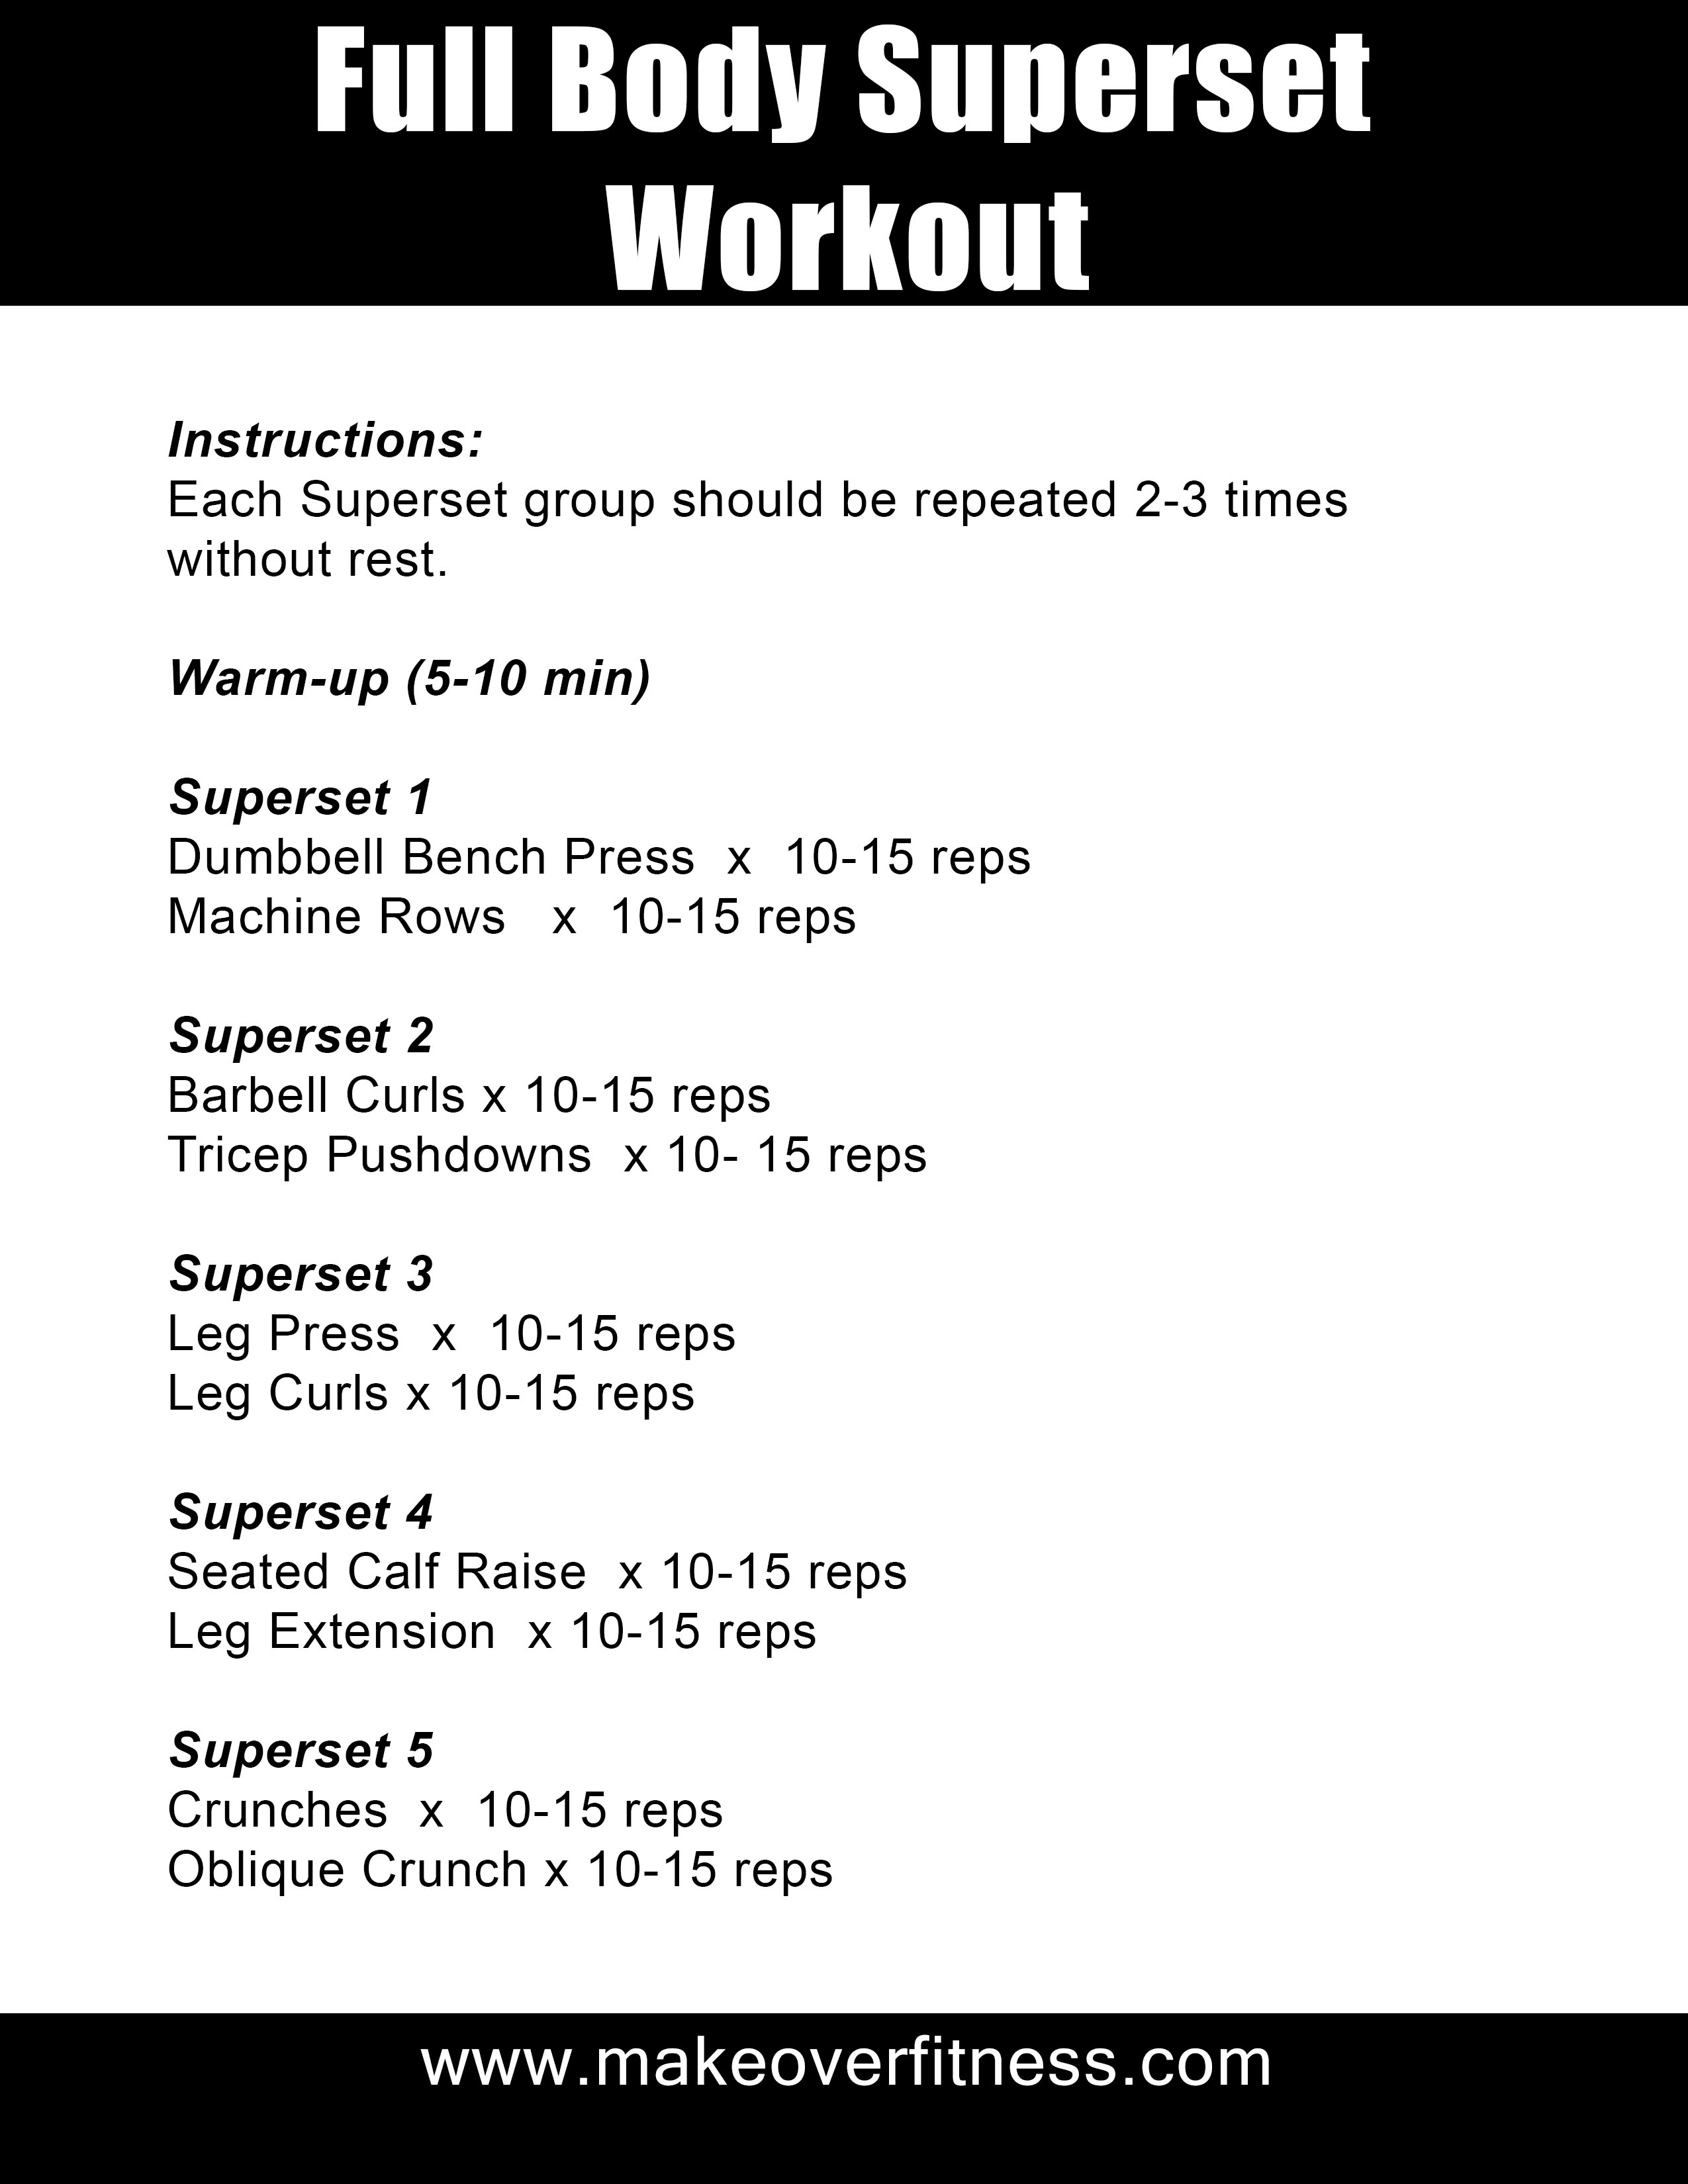 full body superset workout you can download and print.